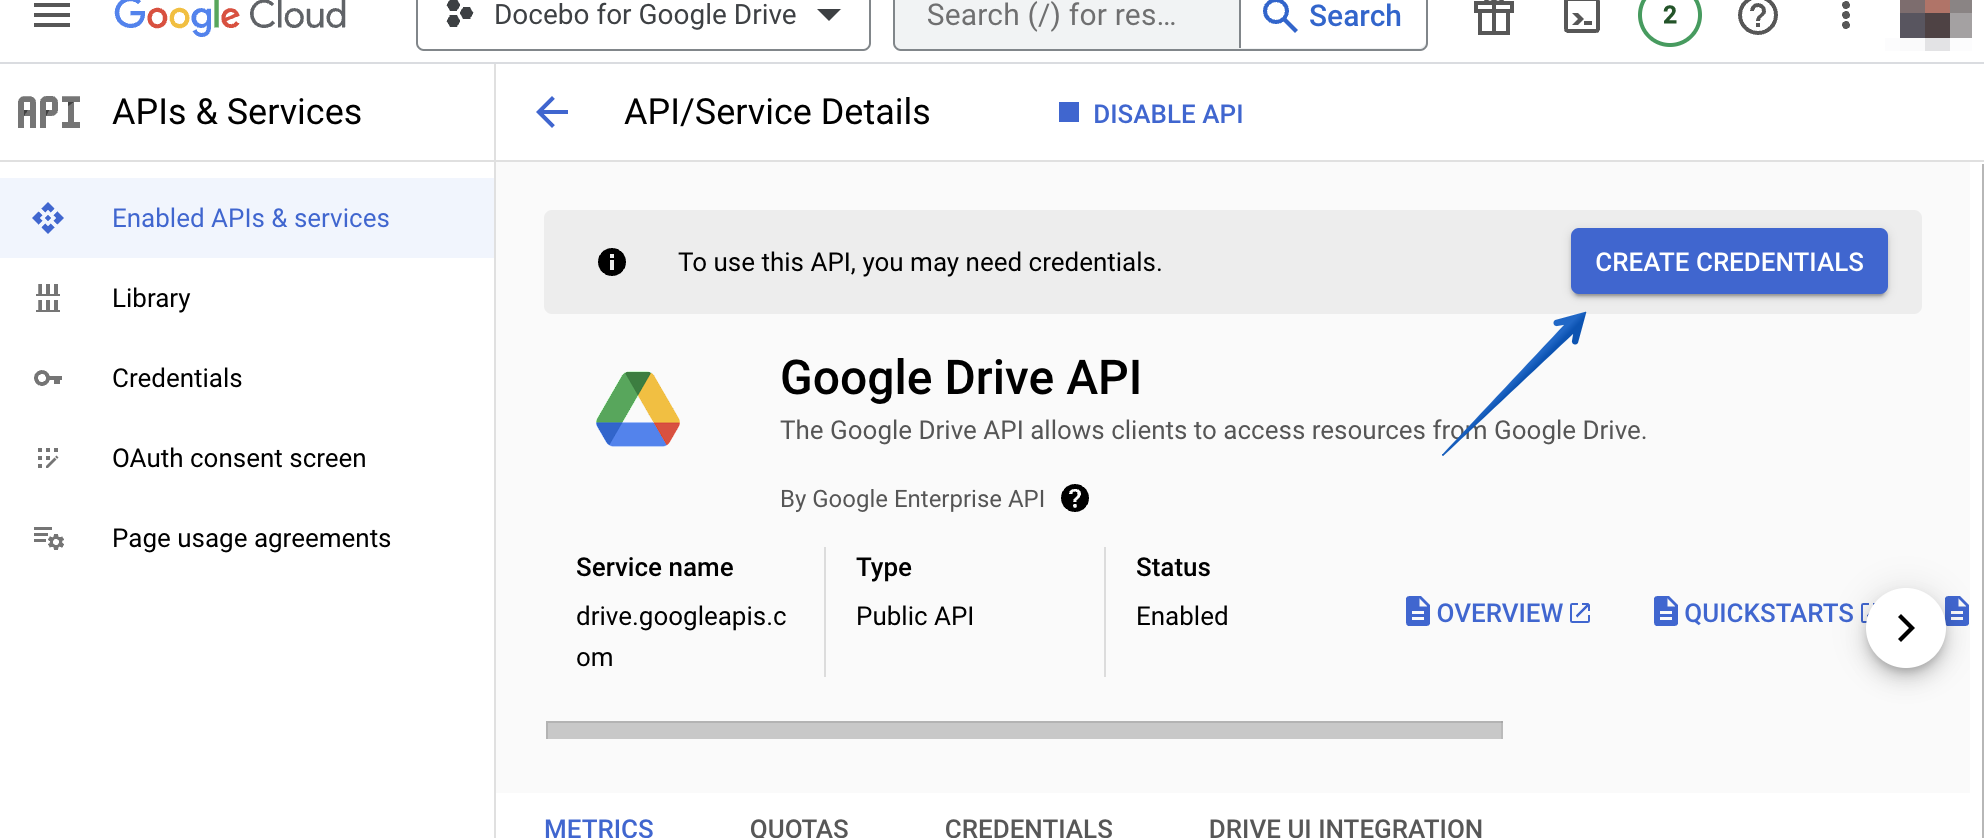 Pressing the Create Credentials button on the Google Drive API overview page